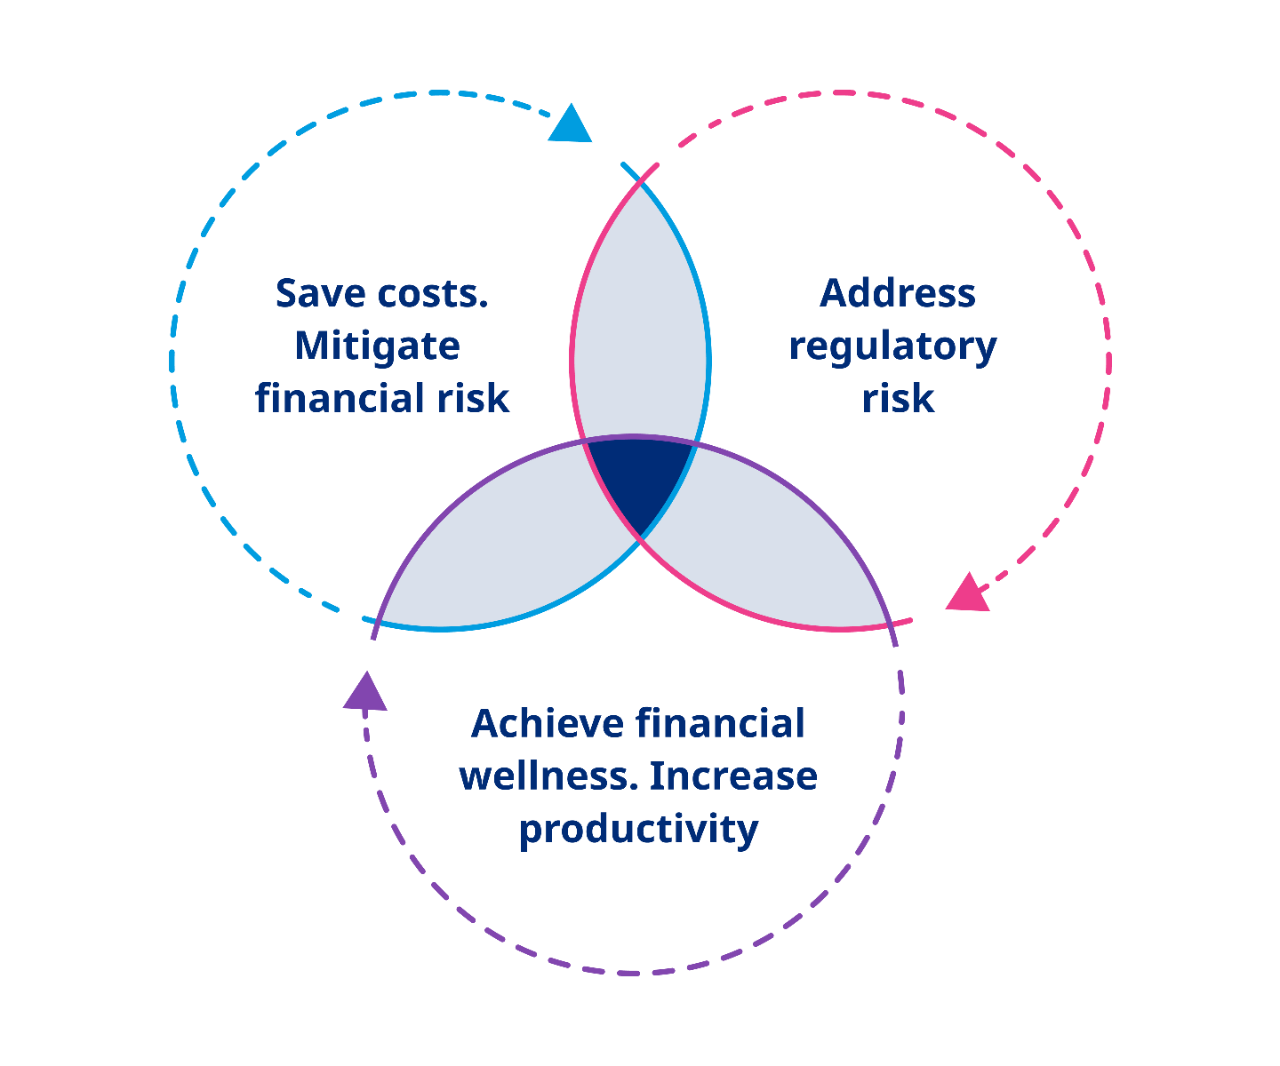 Diagram showing the linked nature of: “save cost. Mitigate financial risk”, “address regulatory risk”, “achieve financial wellness. Increase productivity.”